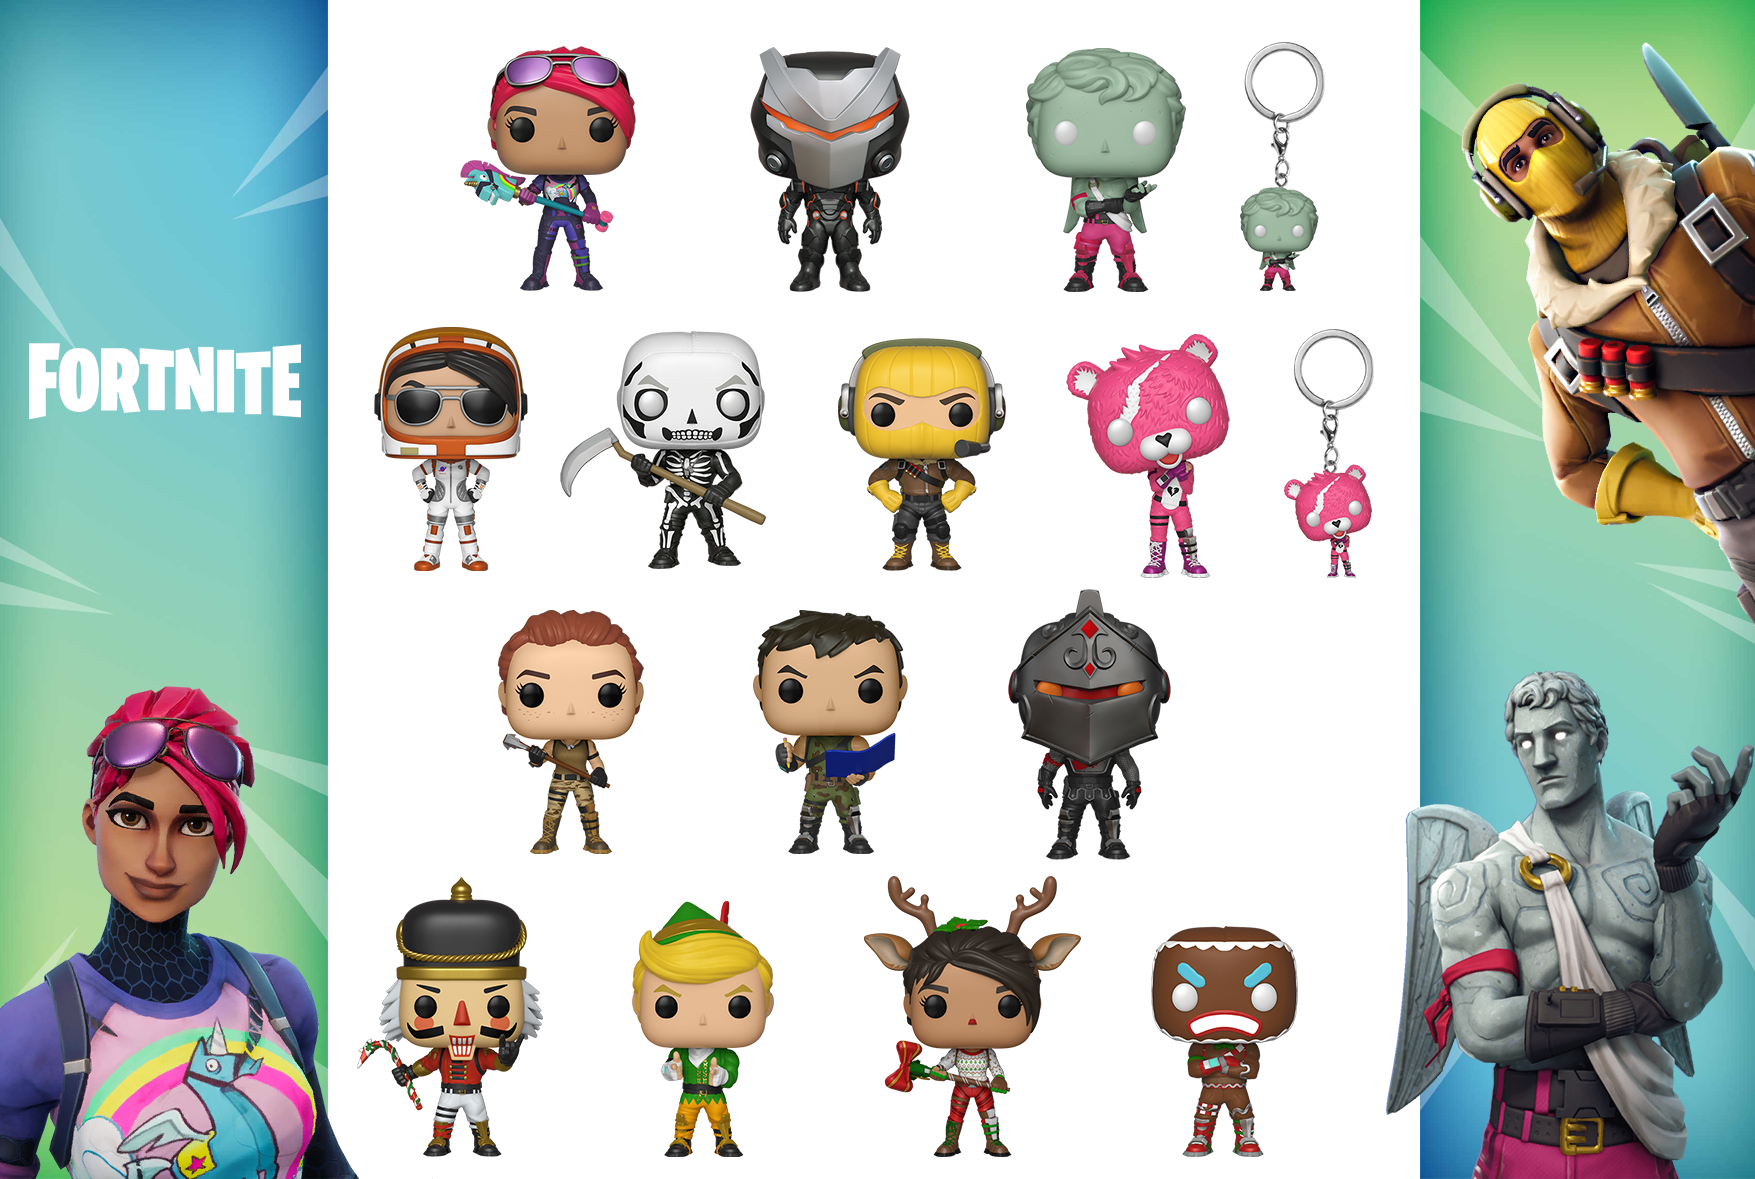 14 Official Fortnite Funko Pop Toys Have Been Revealed And They Re Awesome Dot Esports